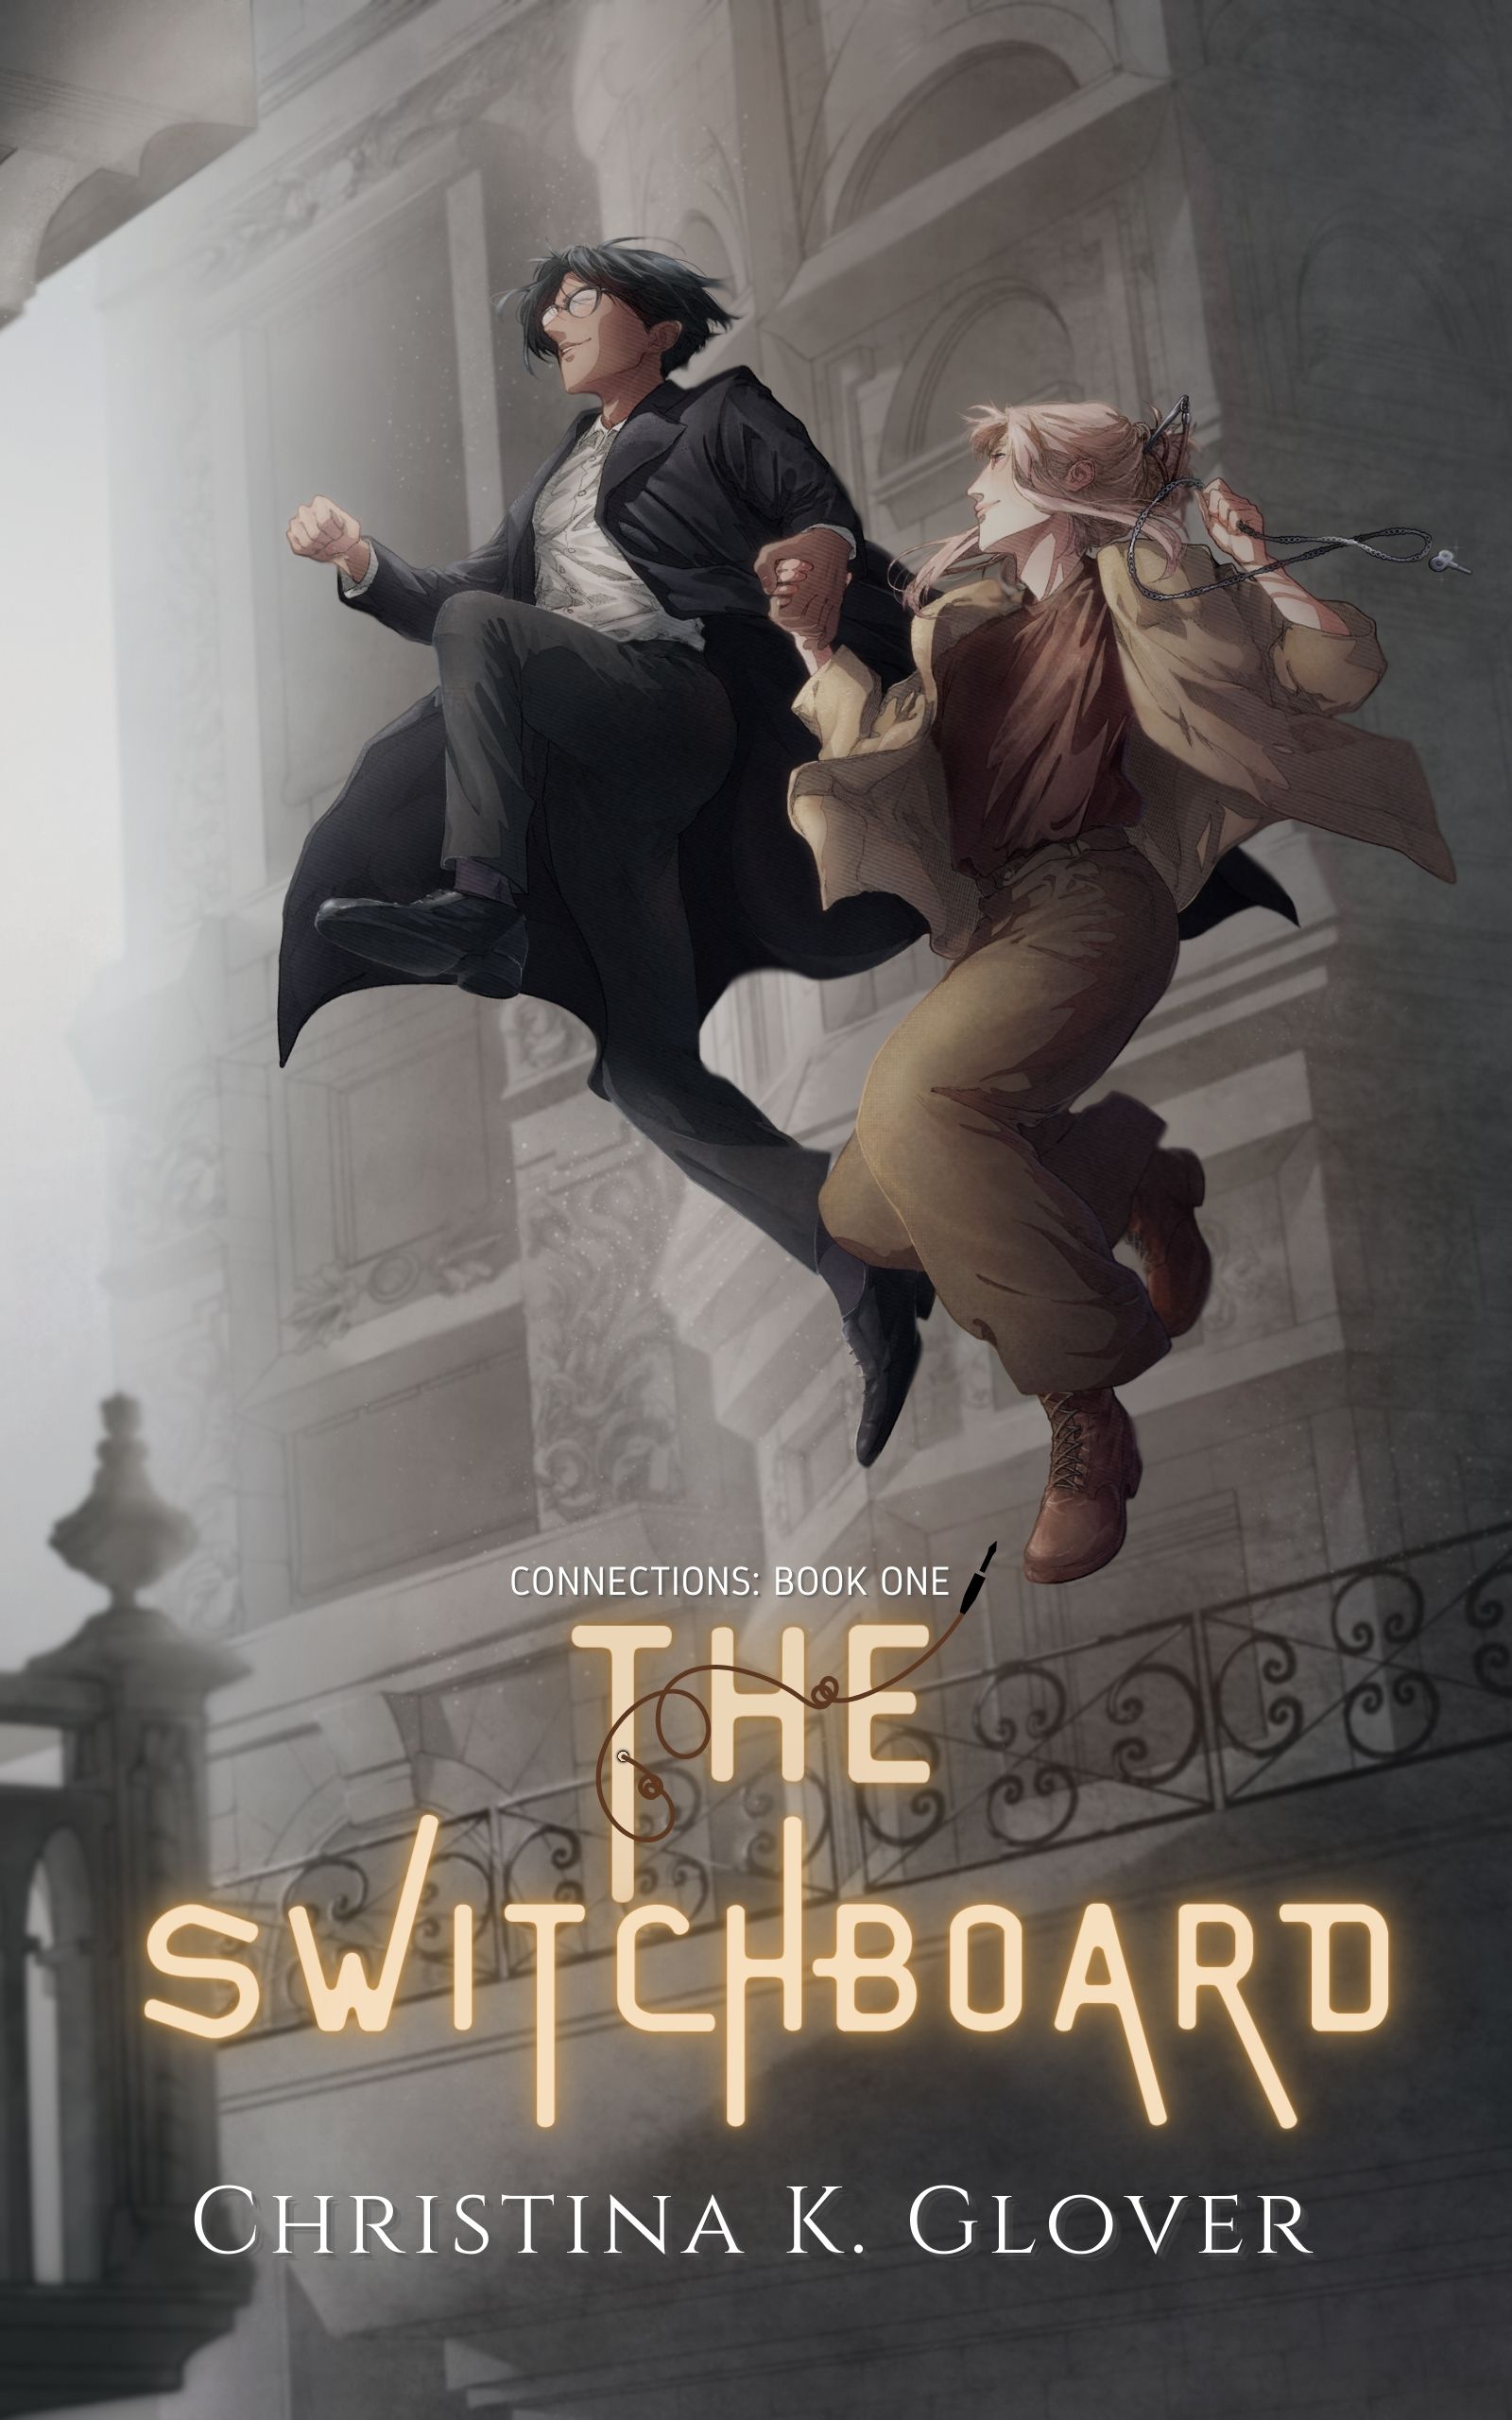 The Switchboard, by Christina K. Glover